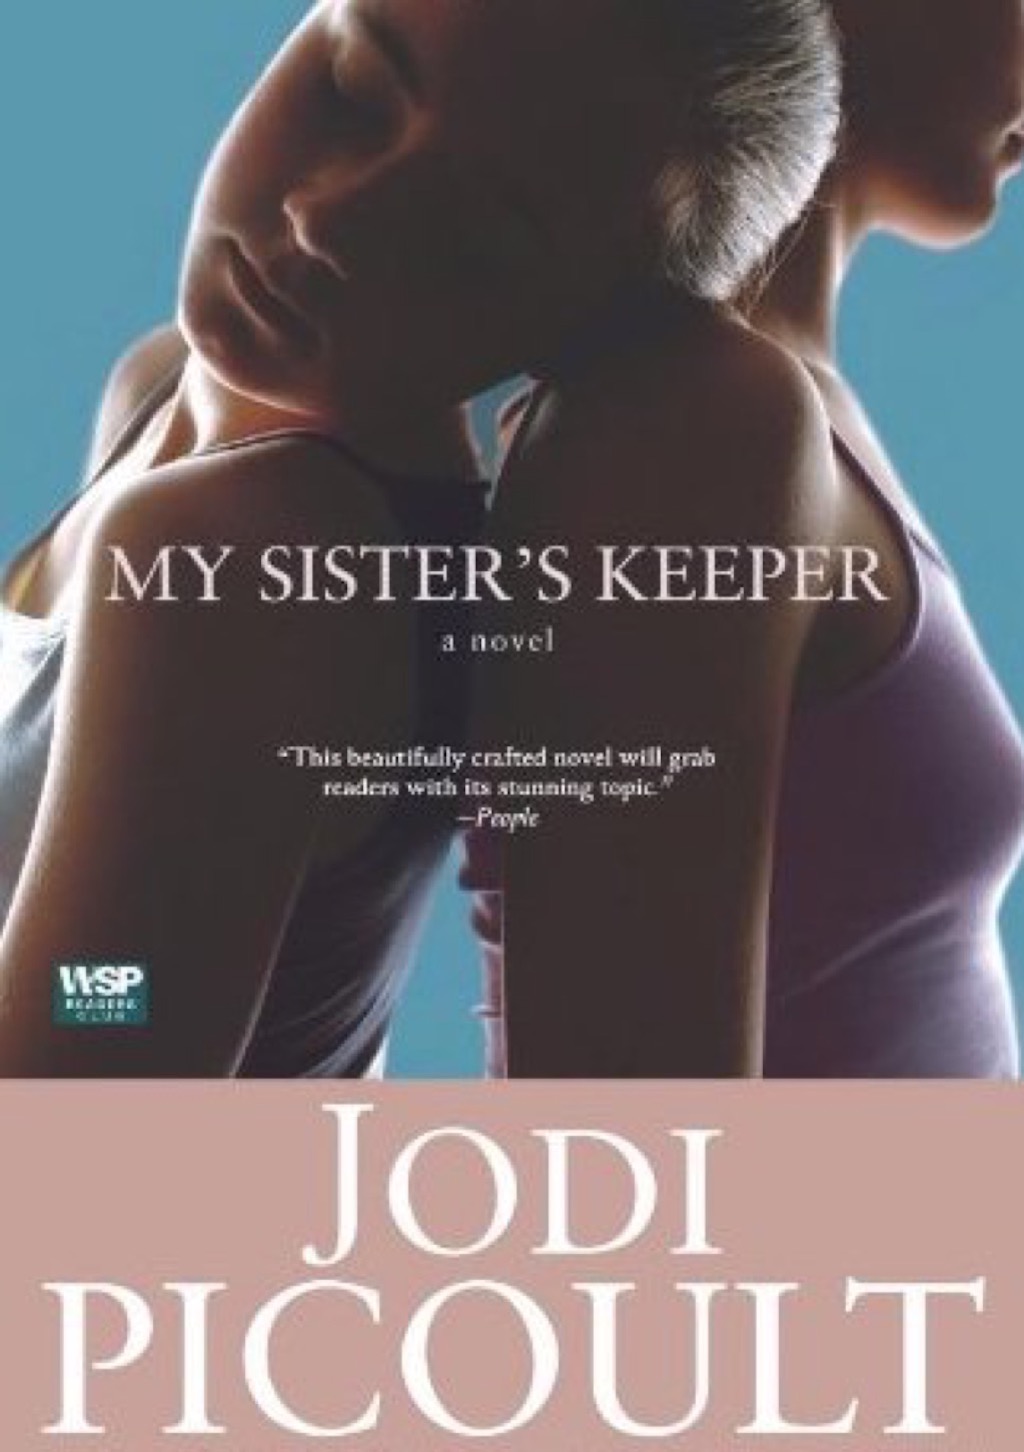 My sister's keeper books every woman should read in her 40s